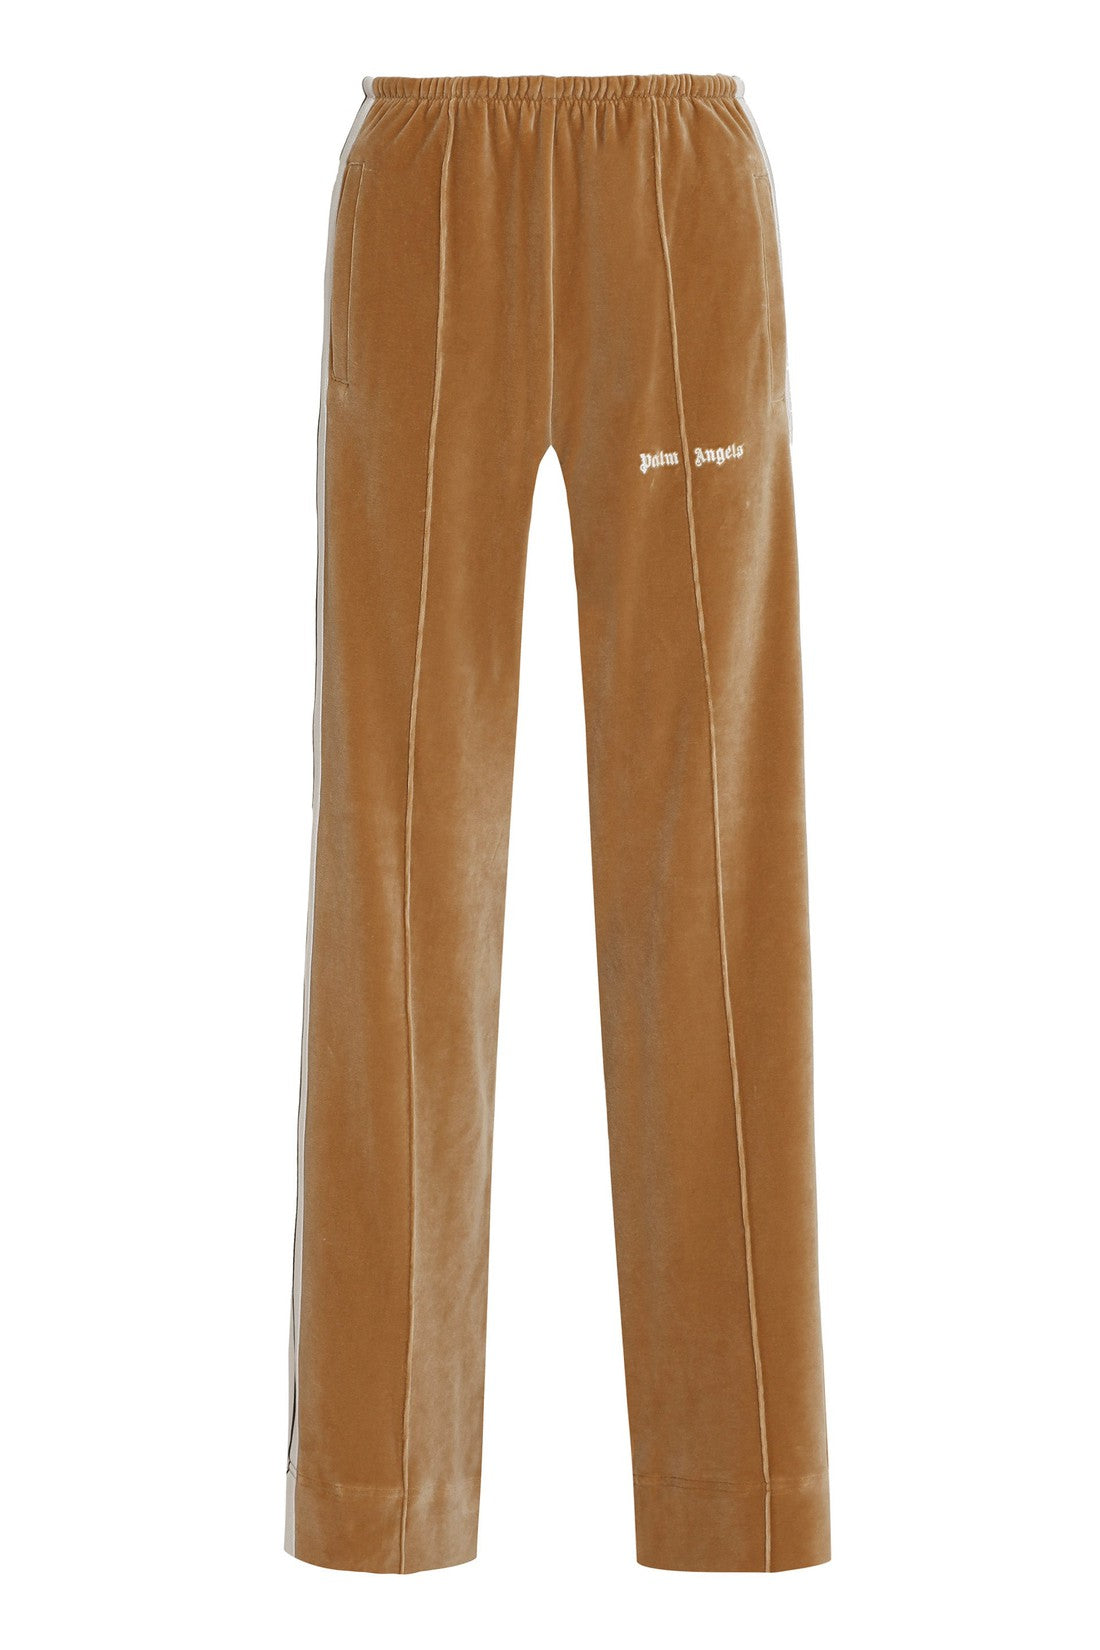 Palm Angels-OUTLET-SALE-Track-pants with contrasting side stripes-ARCHIVIST